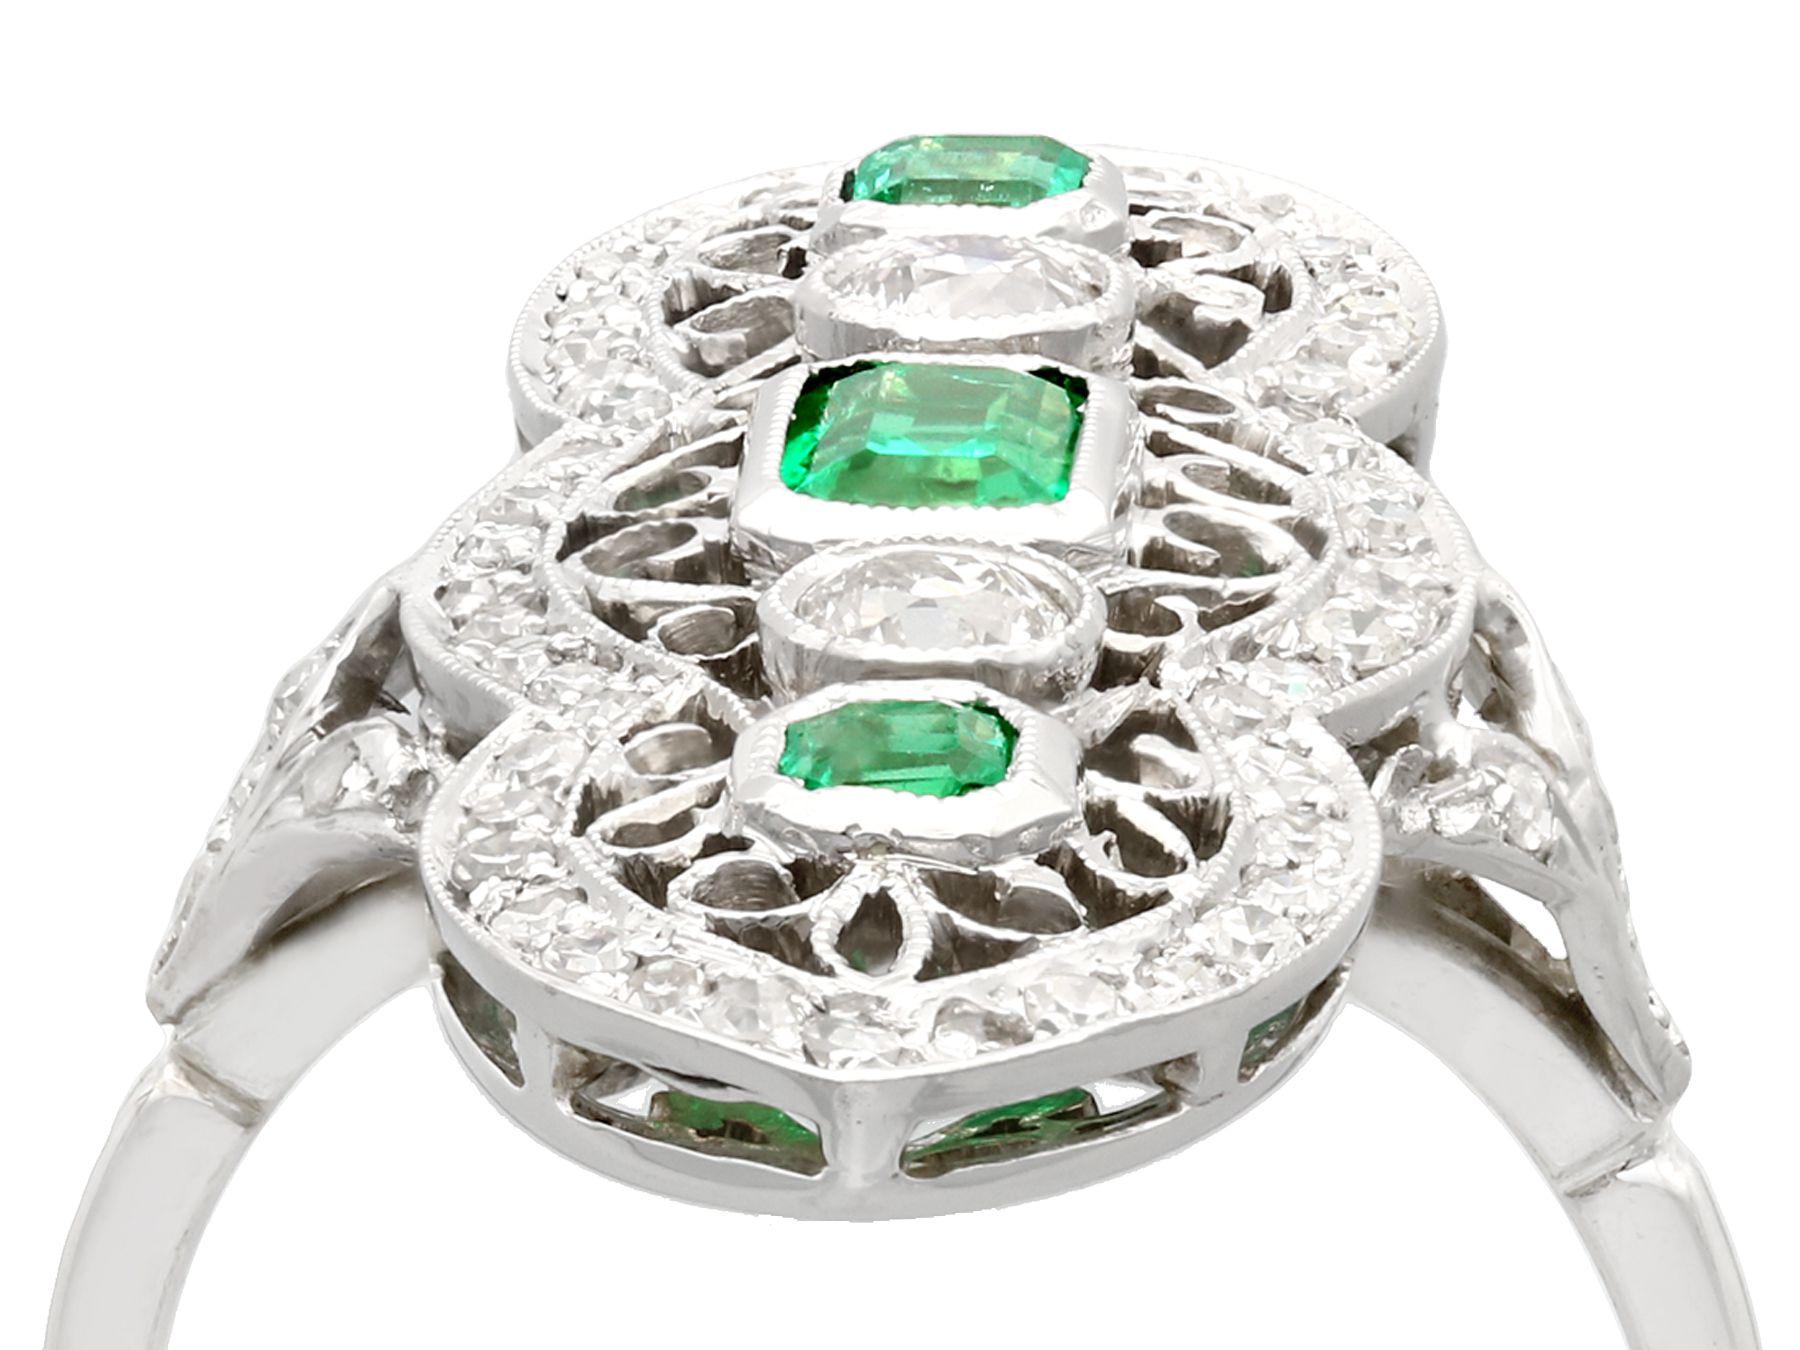 A stunning, fine and impressive antique 0.60 carat emerald and 1.41 carat diamond, 14 karat white gold marquise shaped cocktail ring; part of our diverse antique jewelry and estate jewelry collections.

This stunning antique 1920s emerald cut